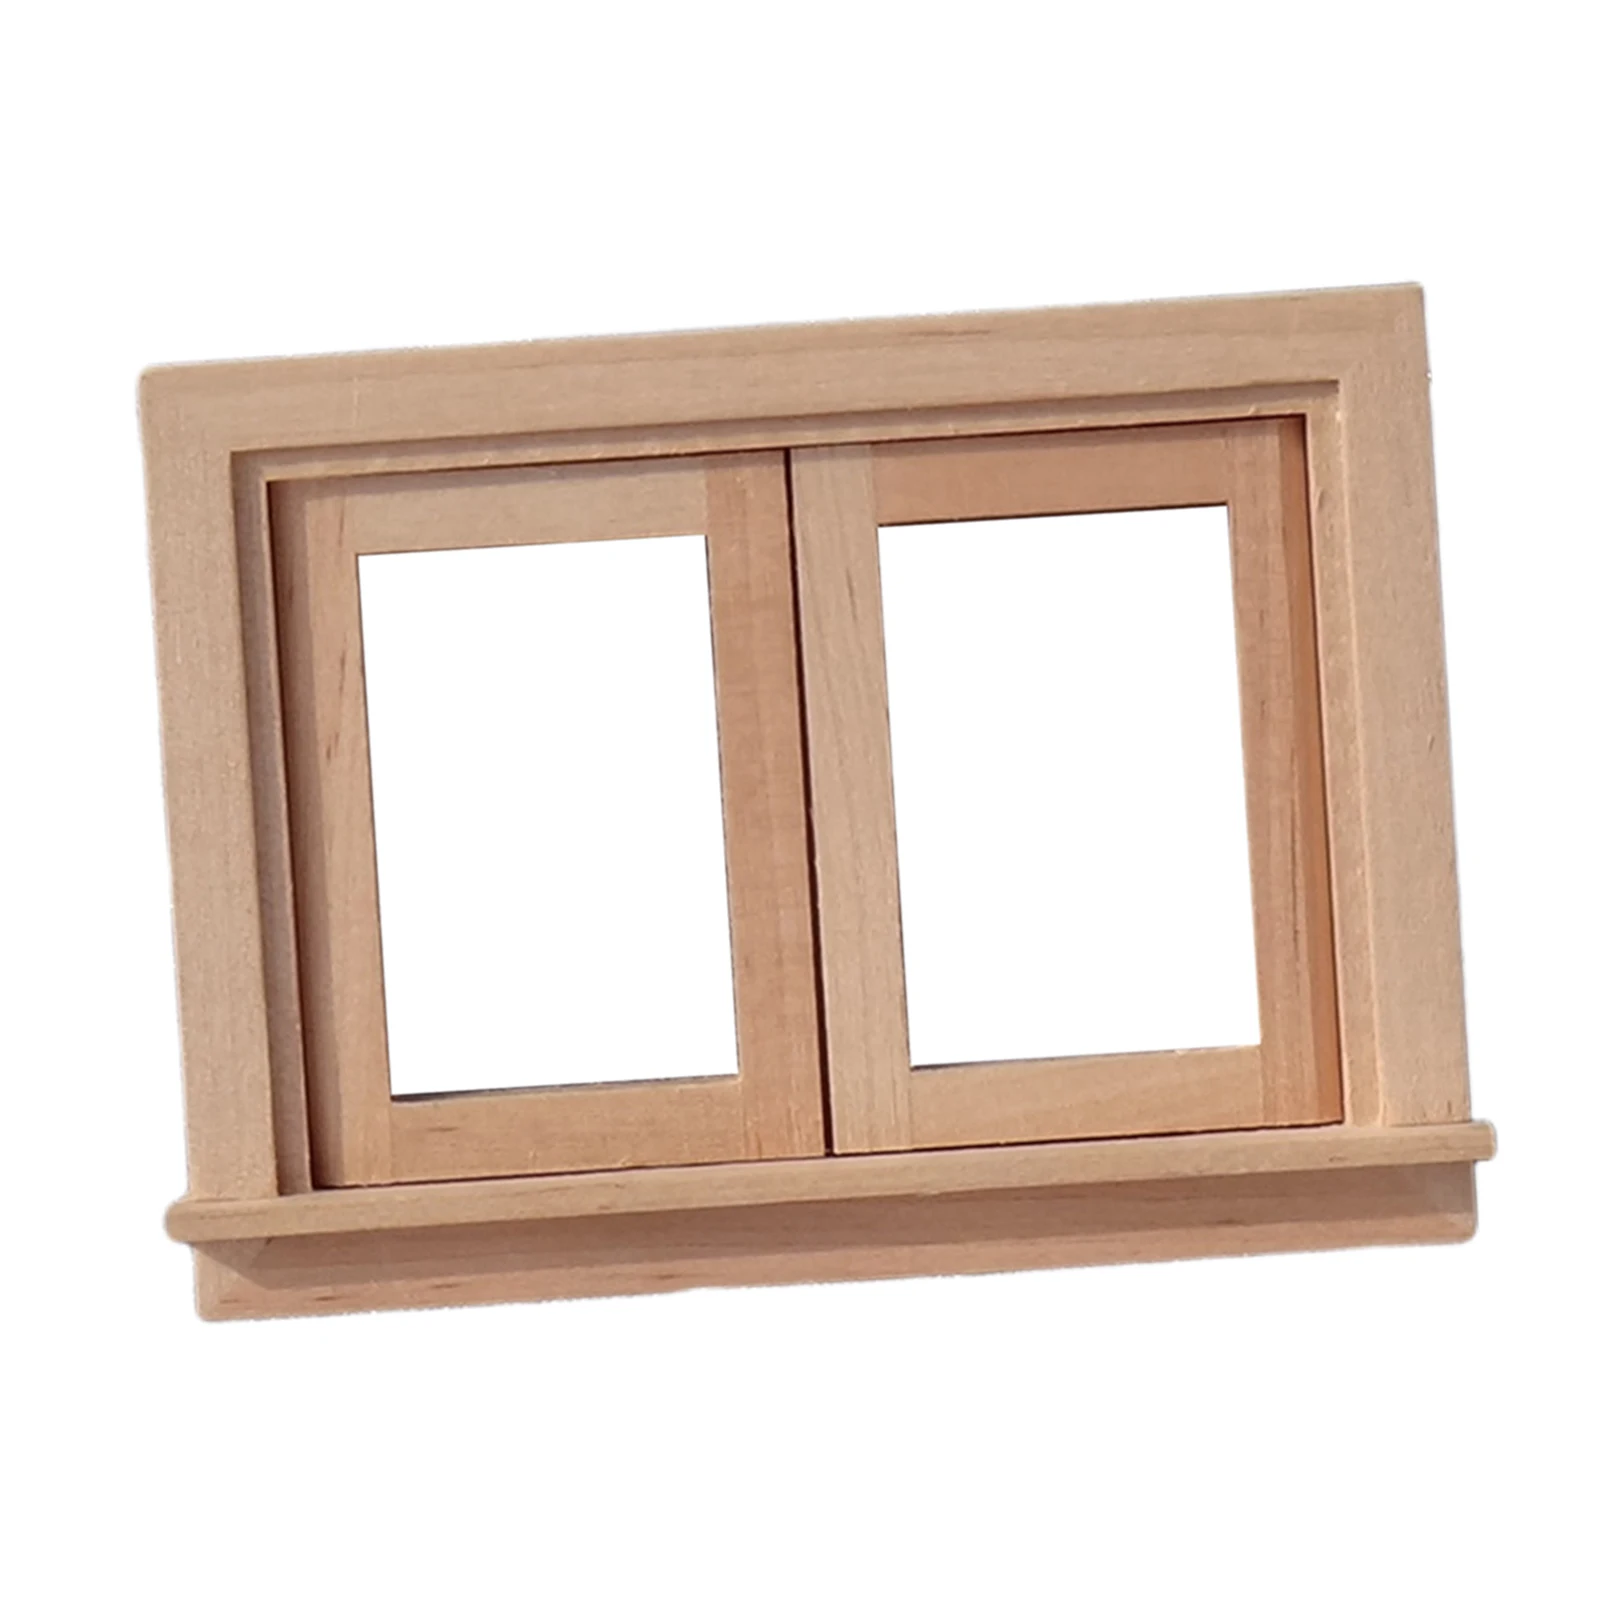 1:12 Wood Window with Two Panes for Dollhouse DIY Decor Pretend Toys Playset